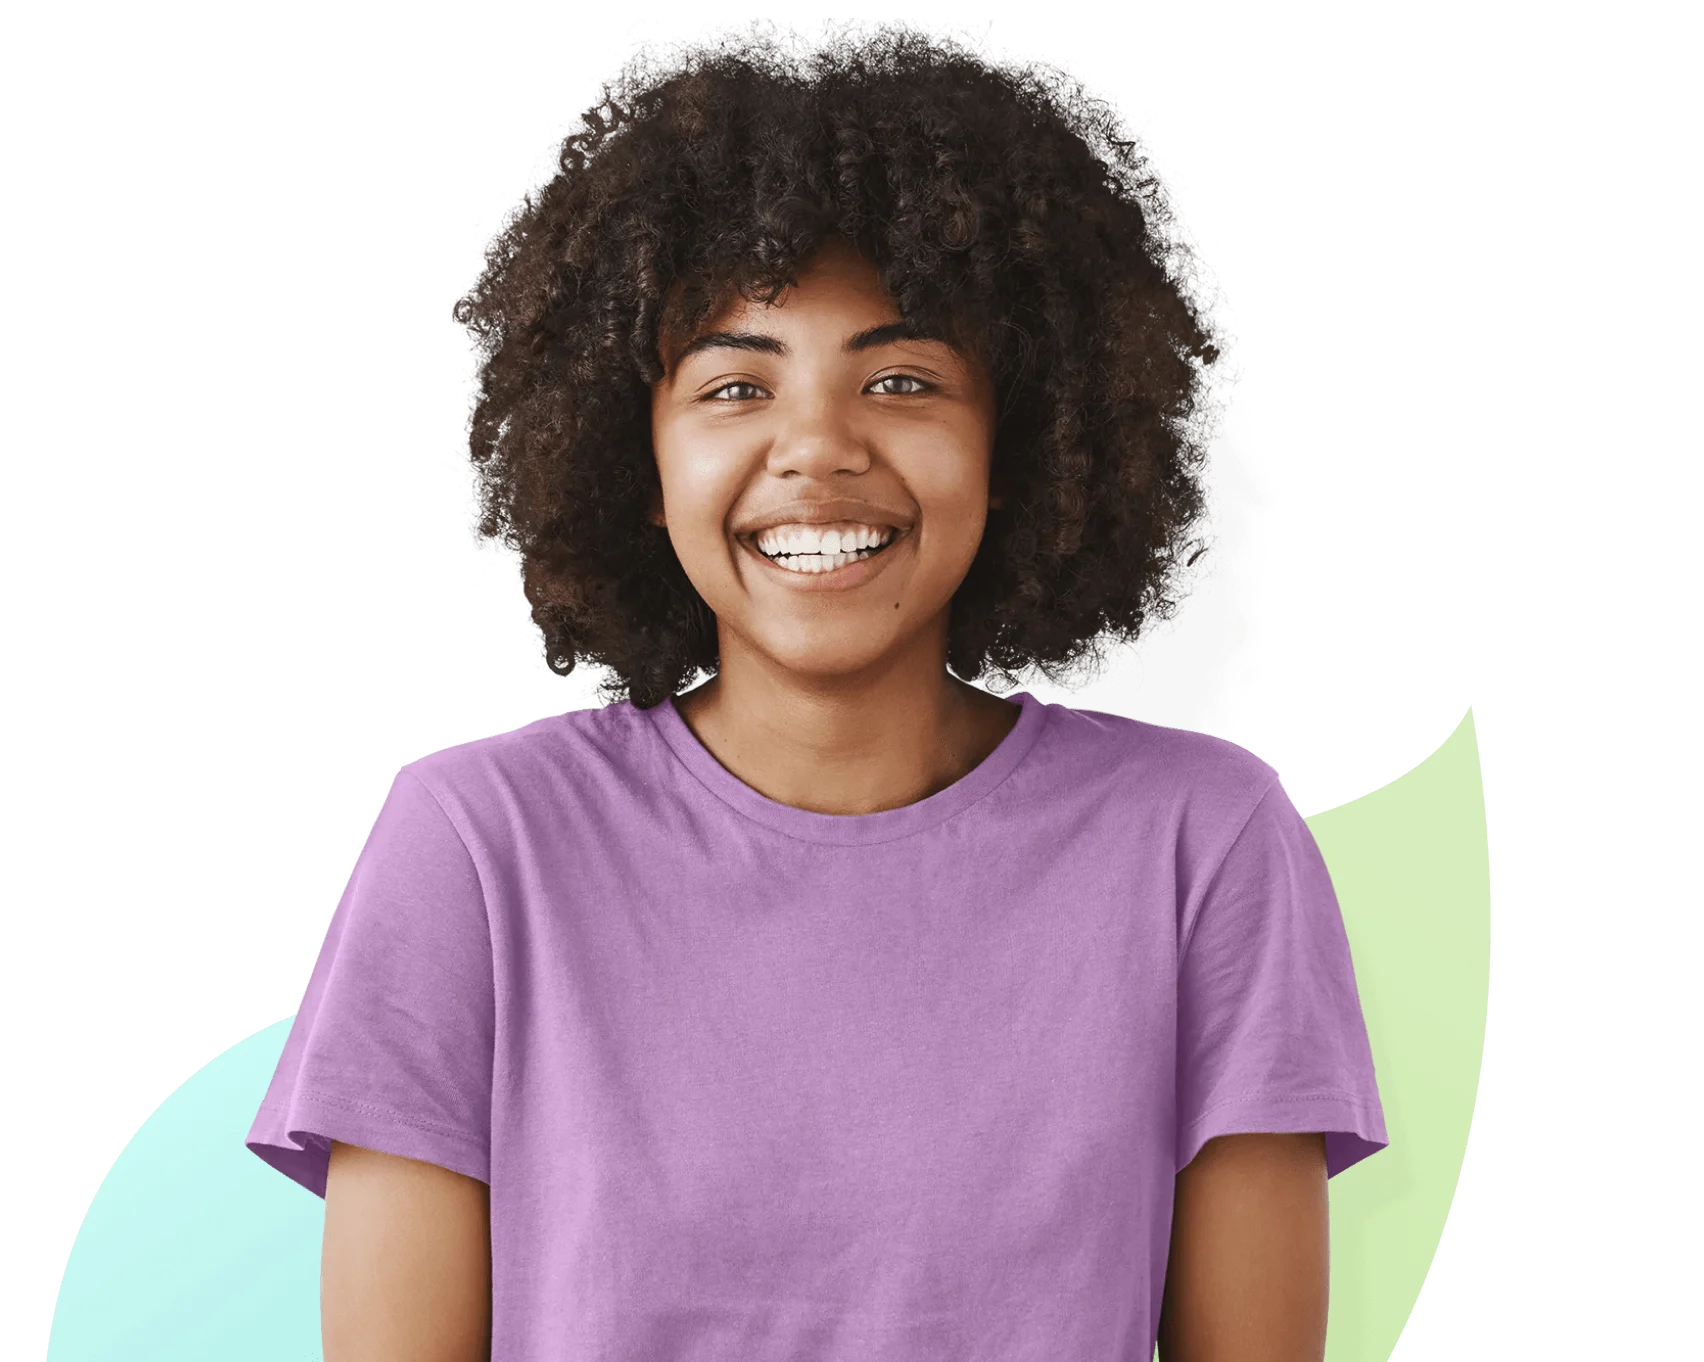 A young girl in a purple t-shirt looking straight ahead and smiling.